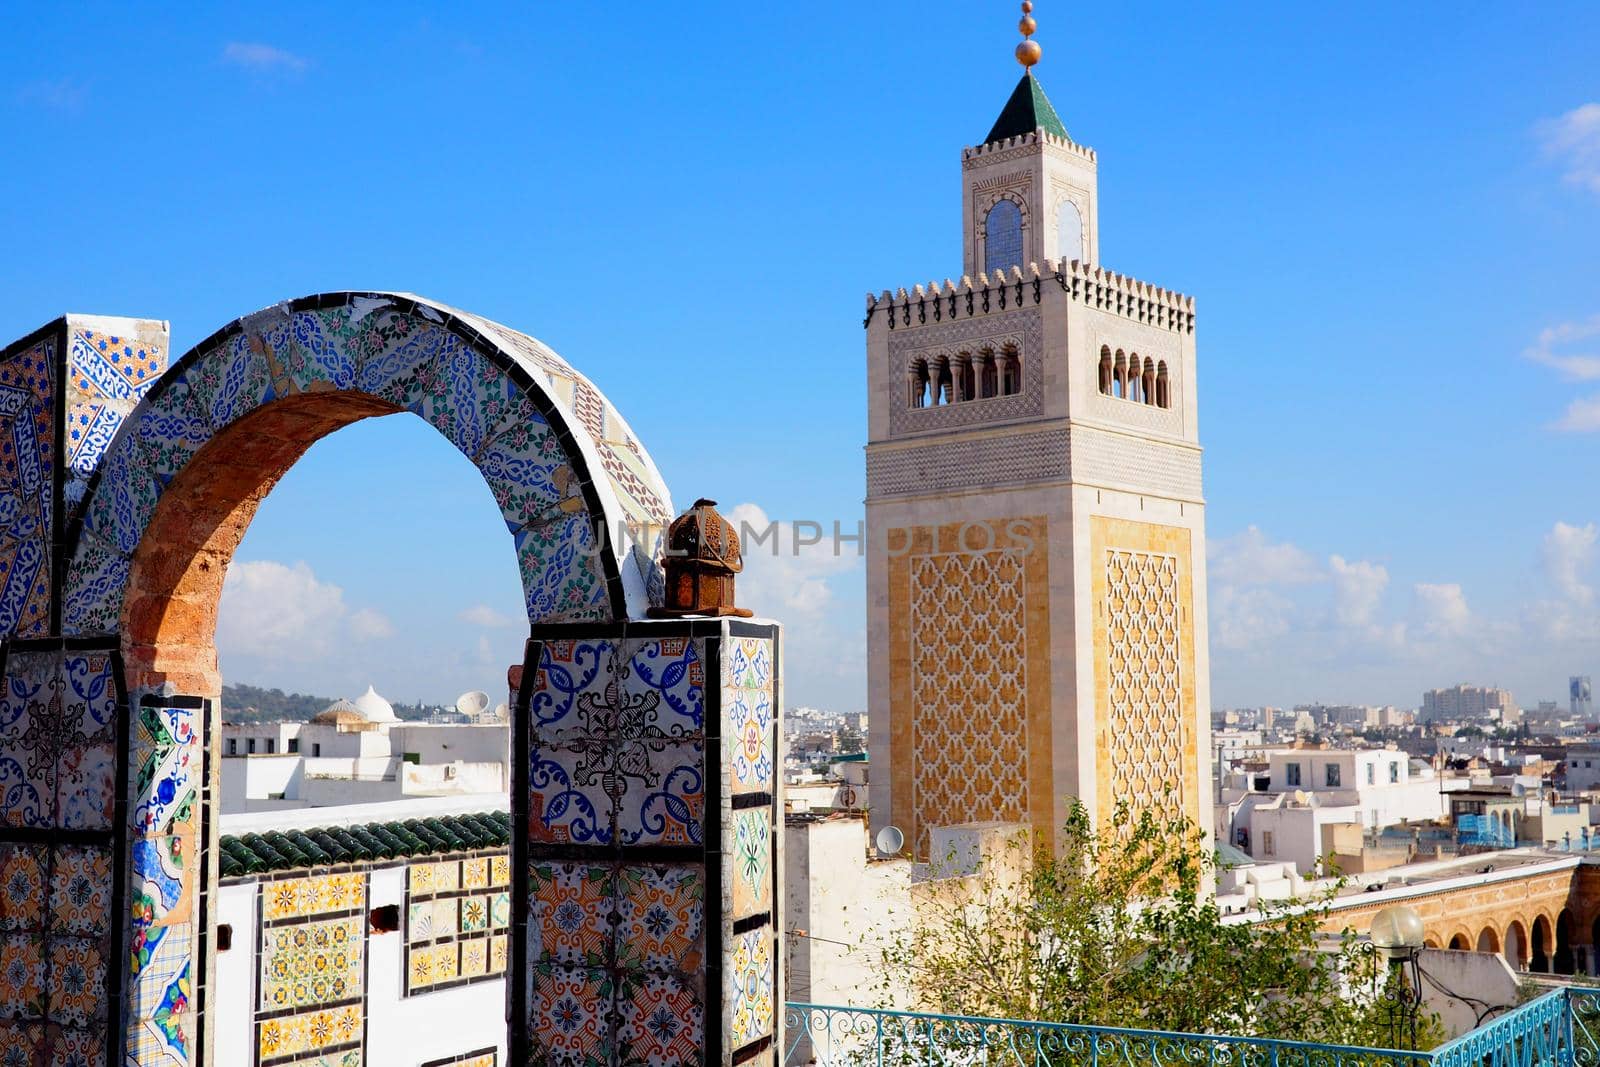 View of famous Mosque in Tunis, Tunisia